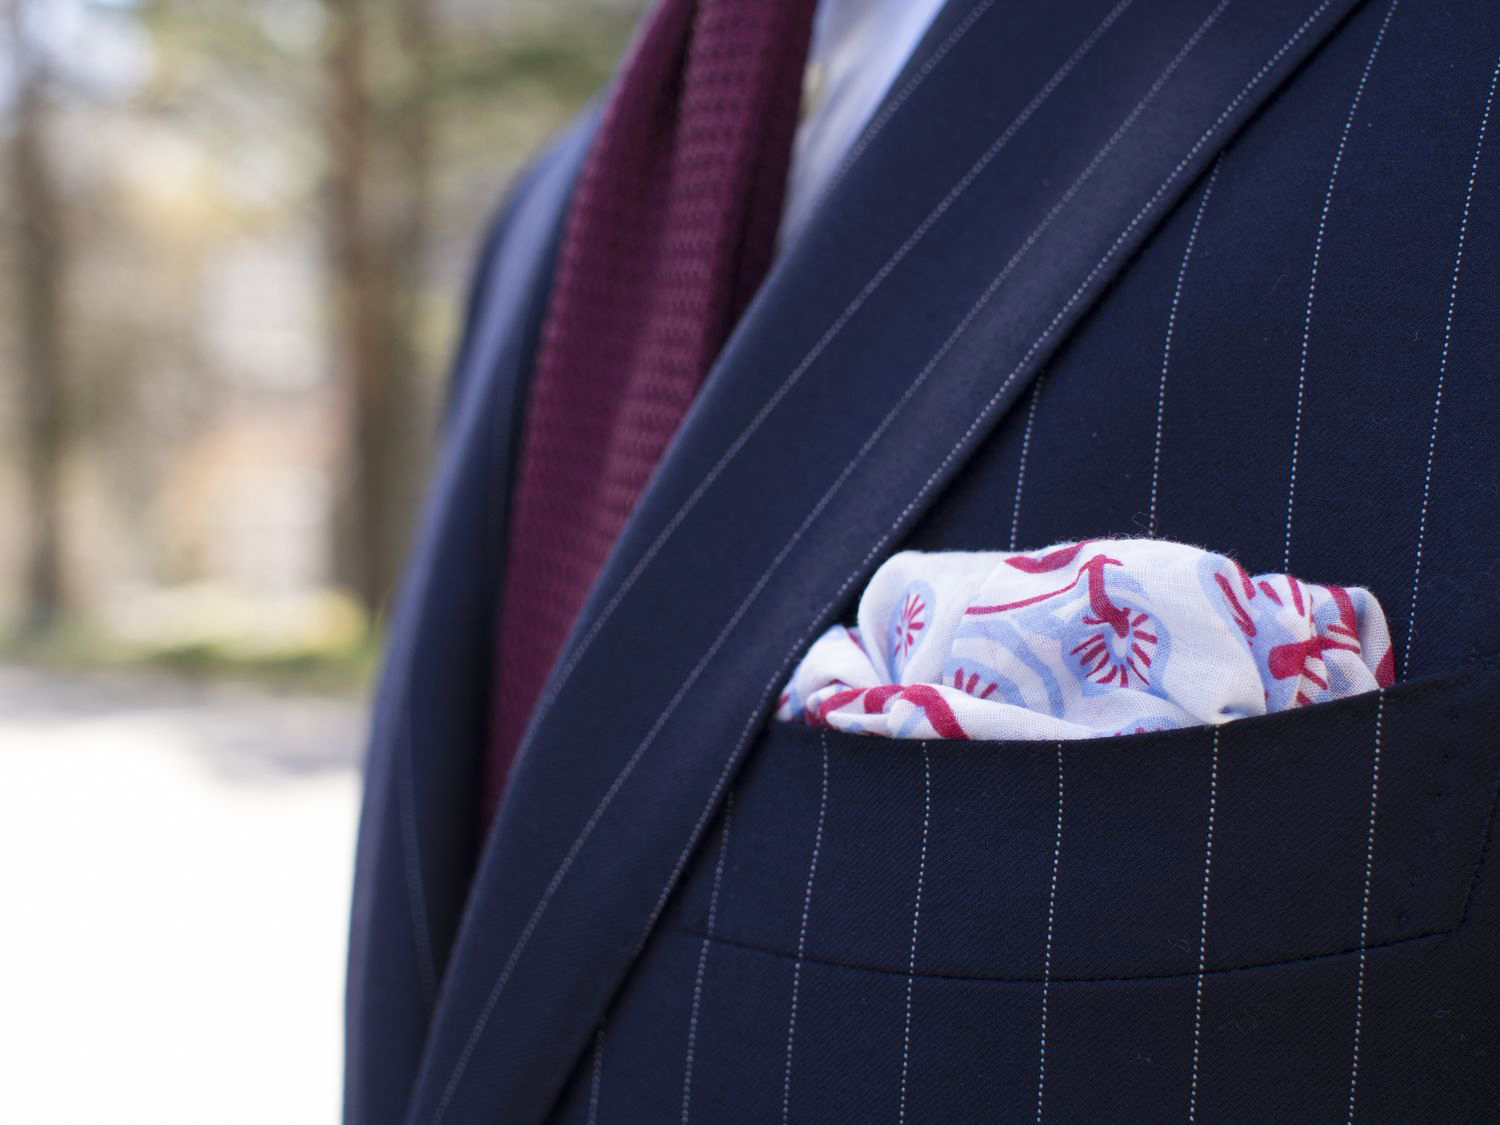 wearing a colorful tie and pocket square with a pinstripe suit